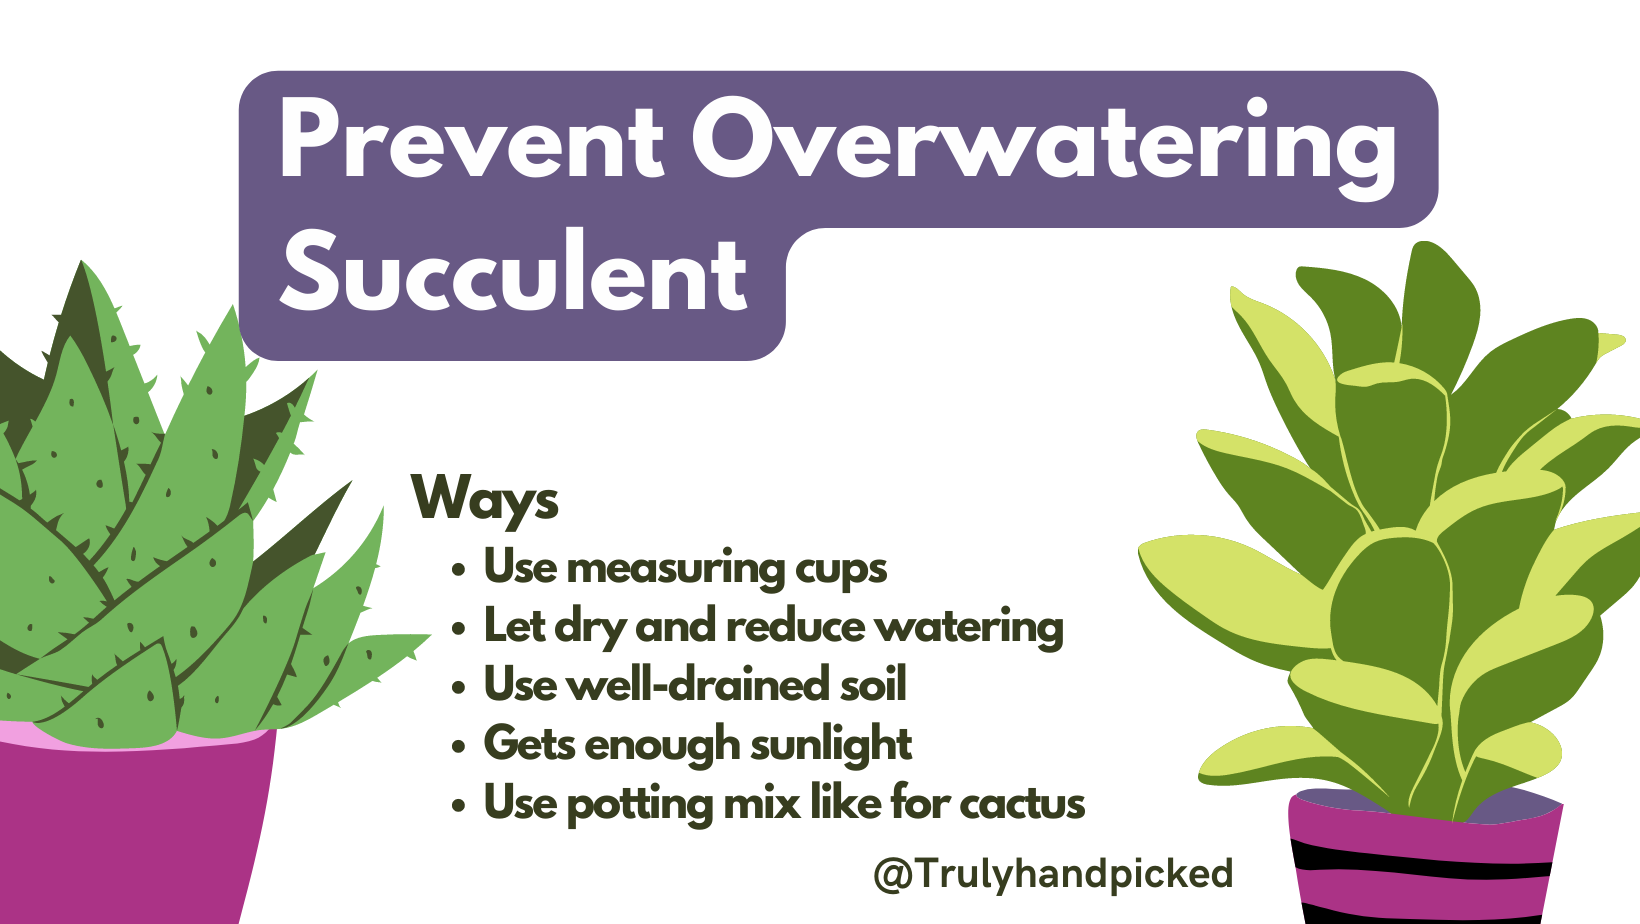 Ways to prevent overwatering your succulent to prevent further damage